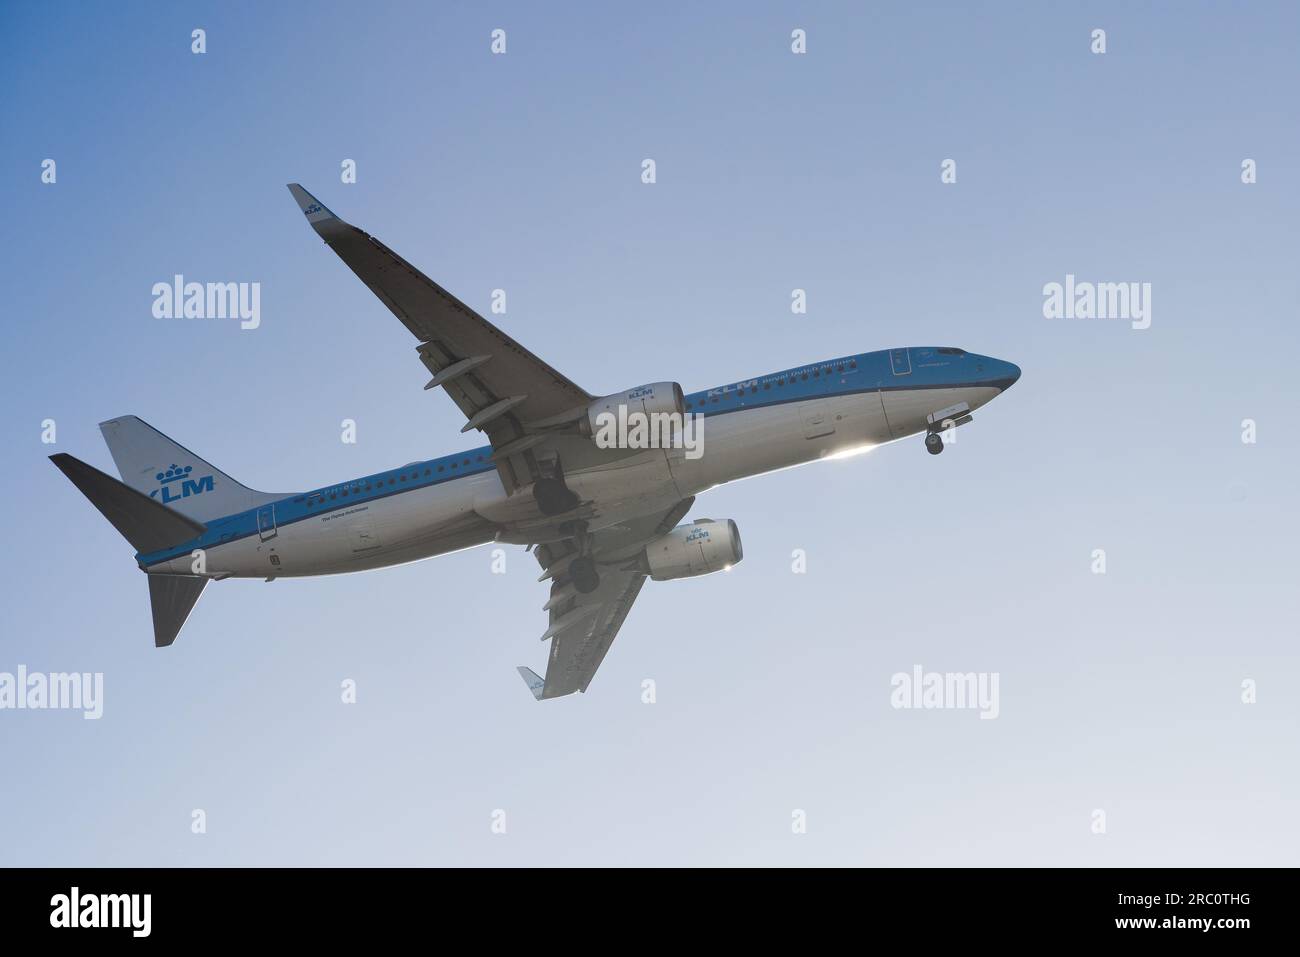 Lisbon, Portugal - July 12, 2023: Dutch company KLM with aircraft Boeing 737-8K2 approaching to land at Lisbon International Airport against blue sky Stock Photo